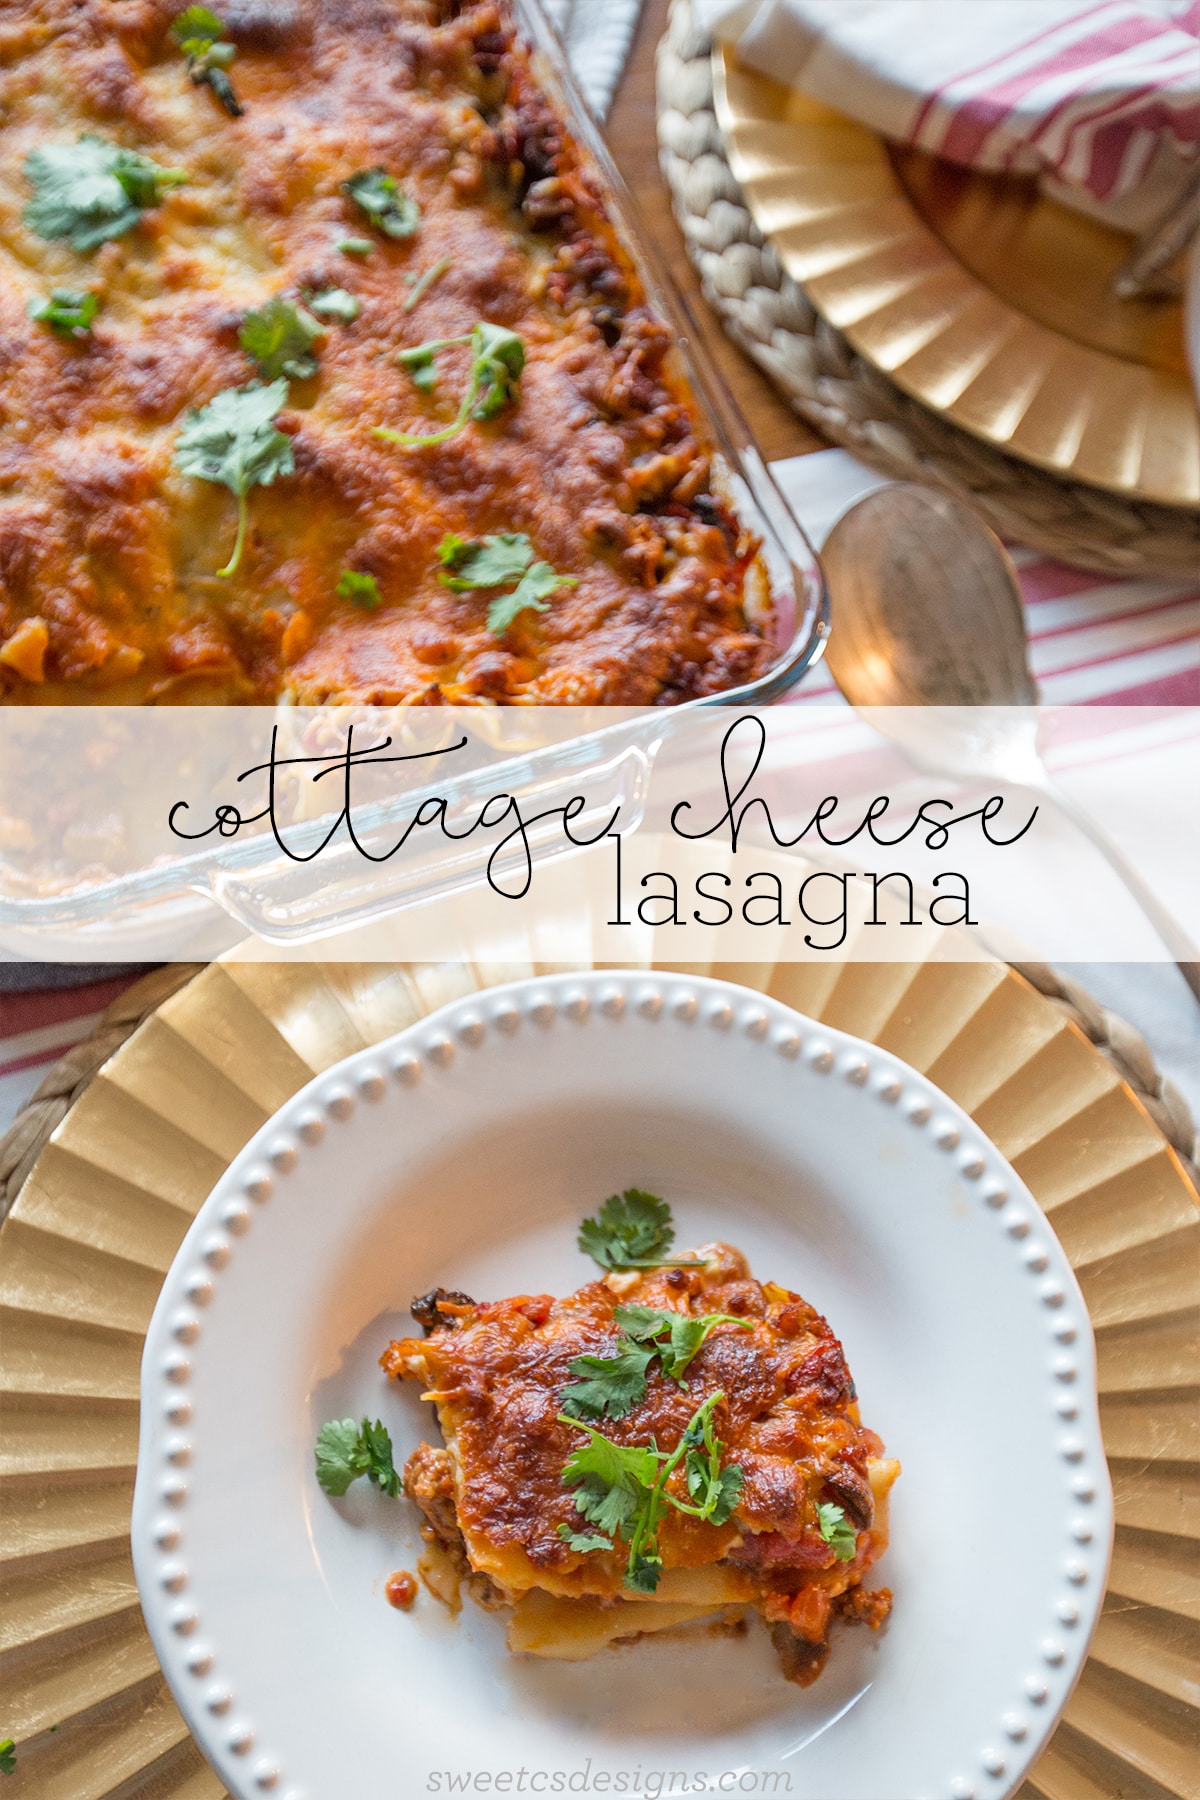 I love this lasagna with cottage cheese instead of lasagna! What an awesome swap! copy